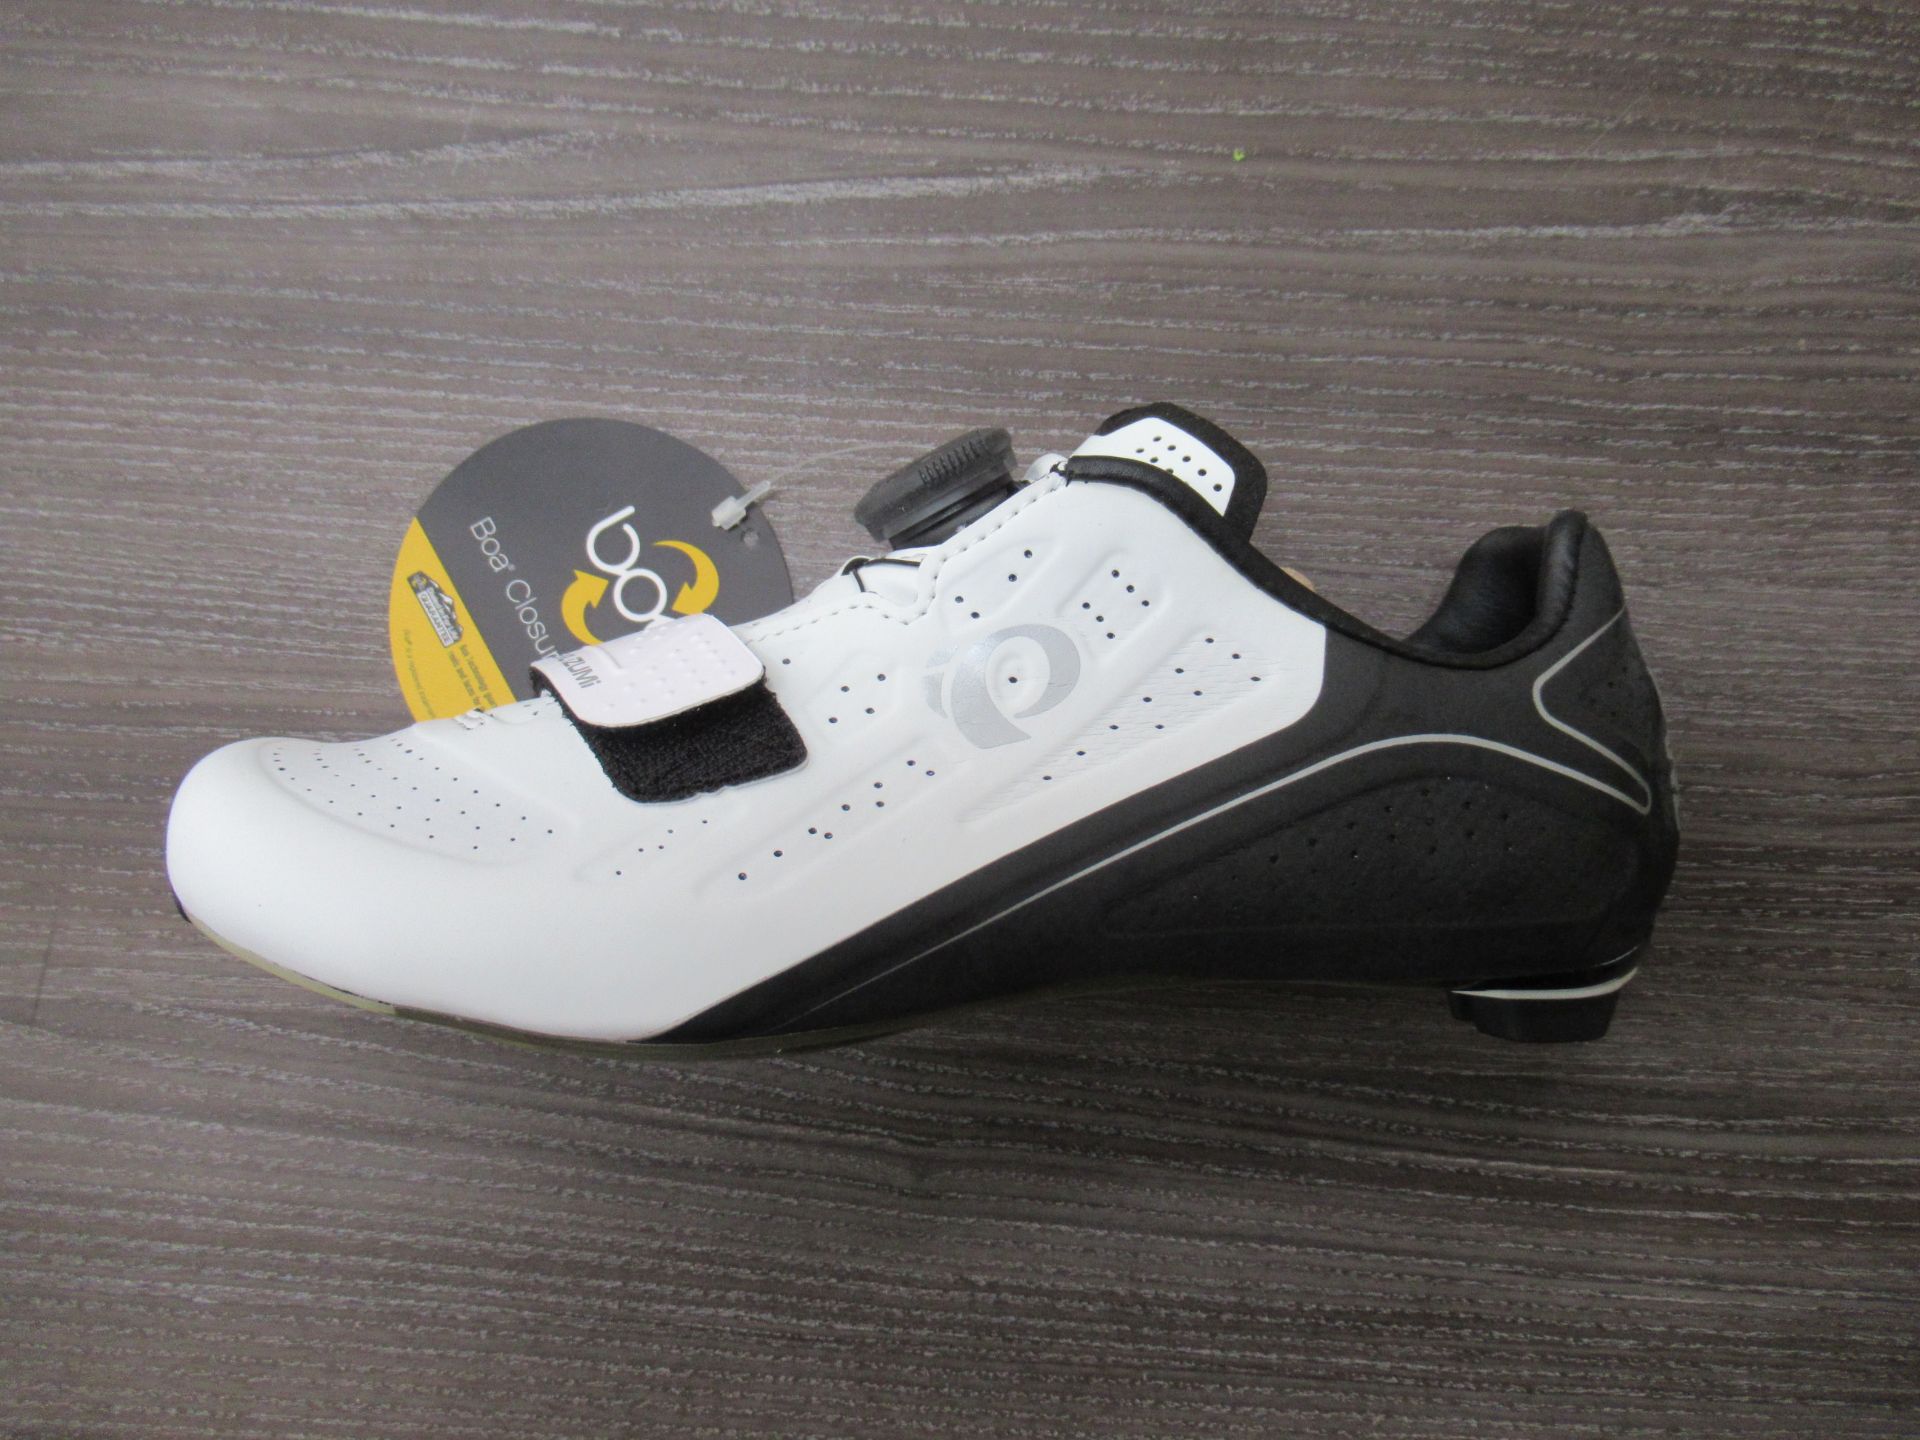 Pair of Pearl Izumi ladies cycling shoes (white/black) - boxed EU size 37 (RRP£179.9)